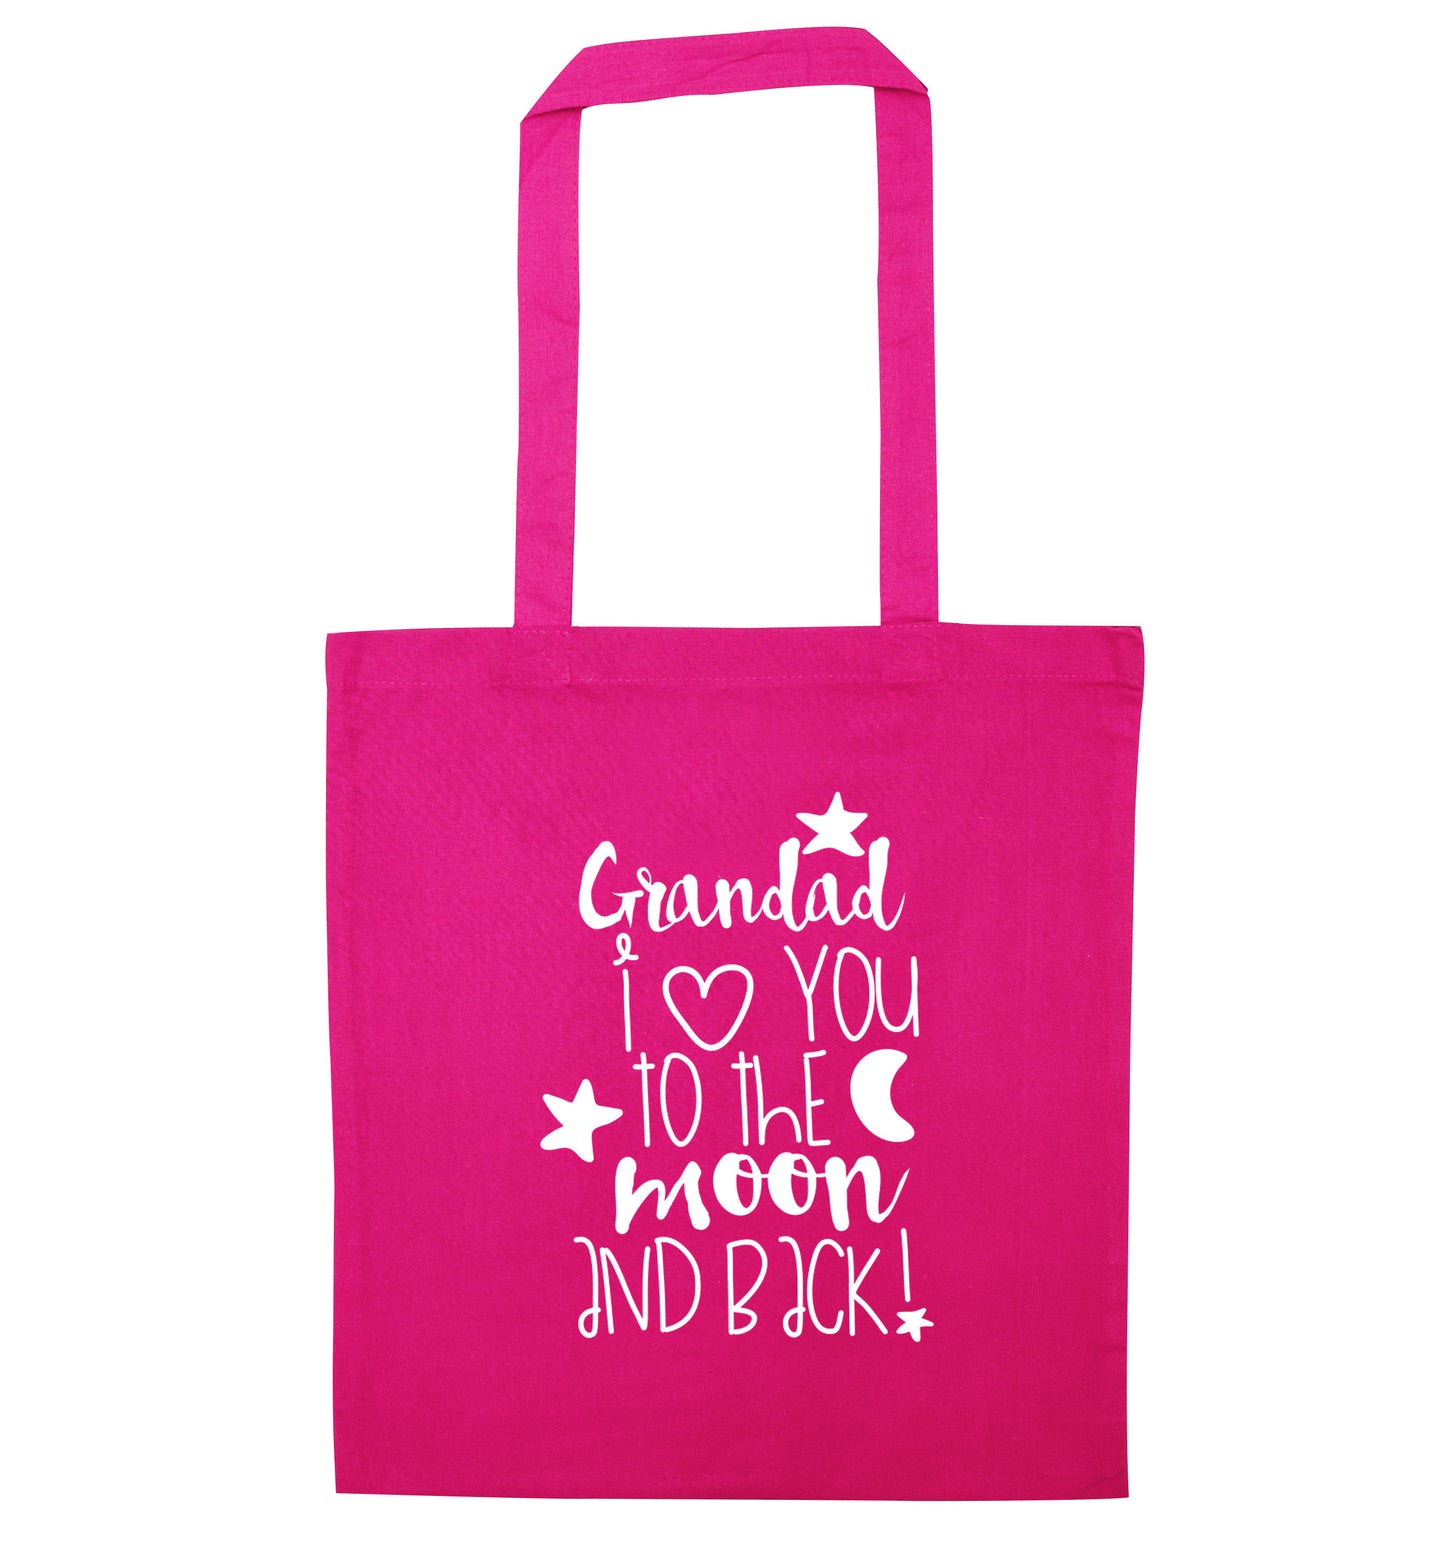 Grandad's I love you to the moon and back pink tote bag